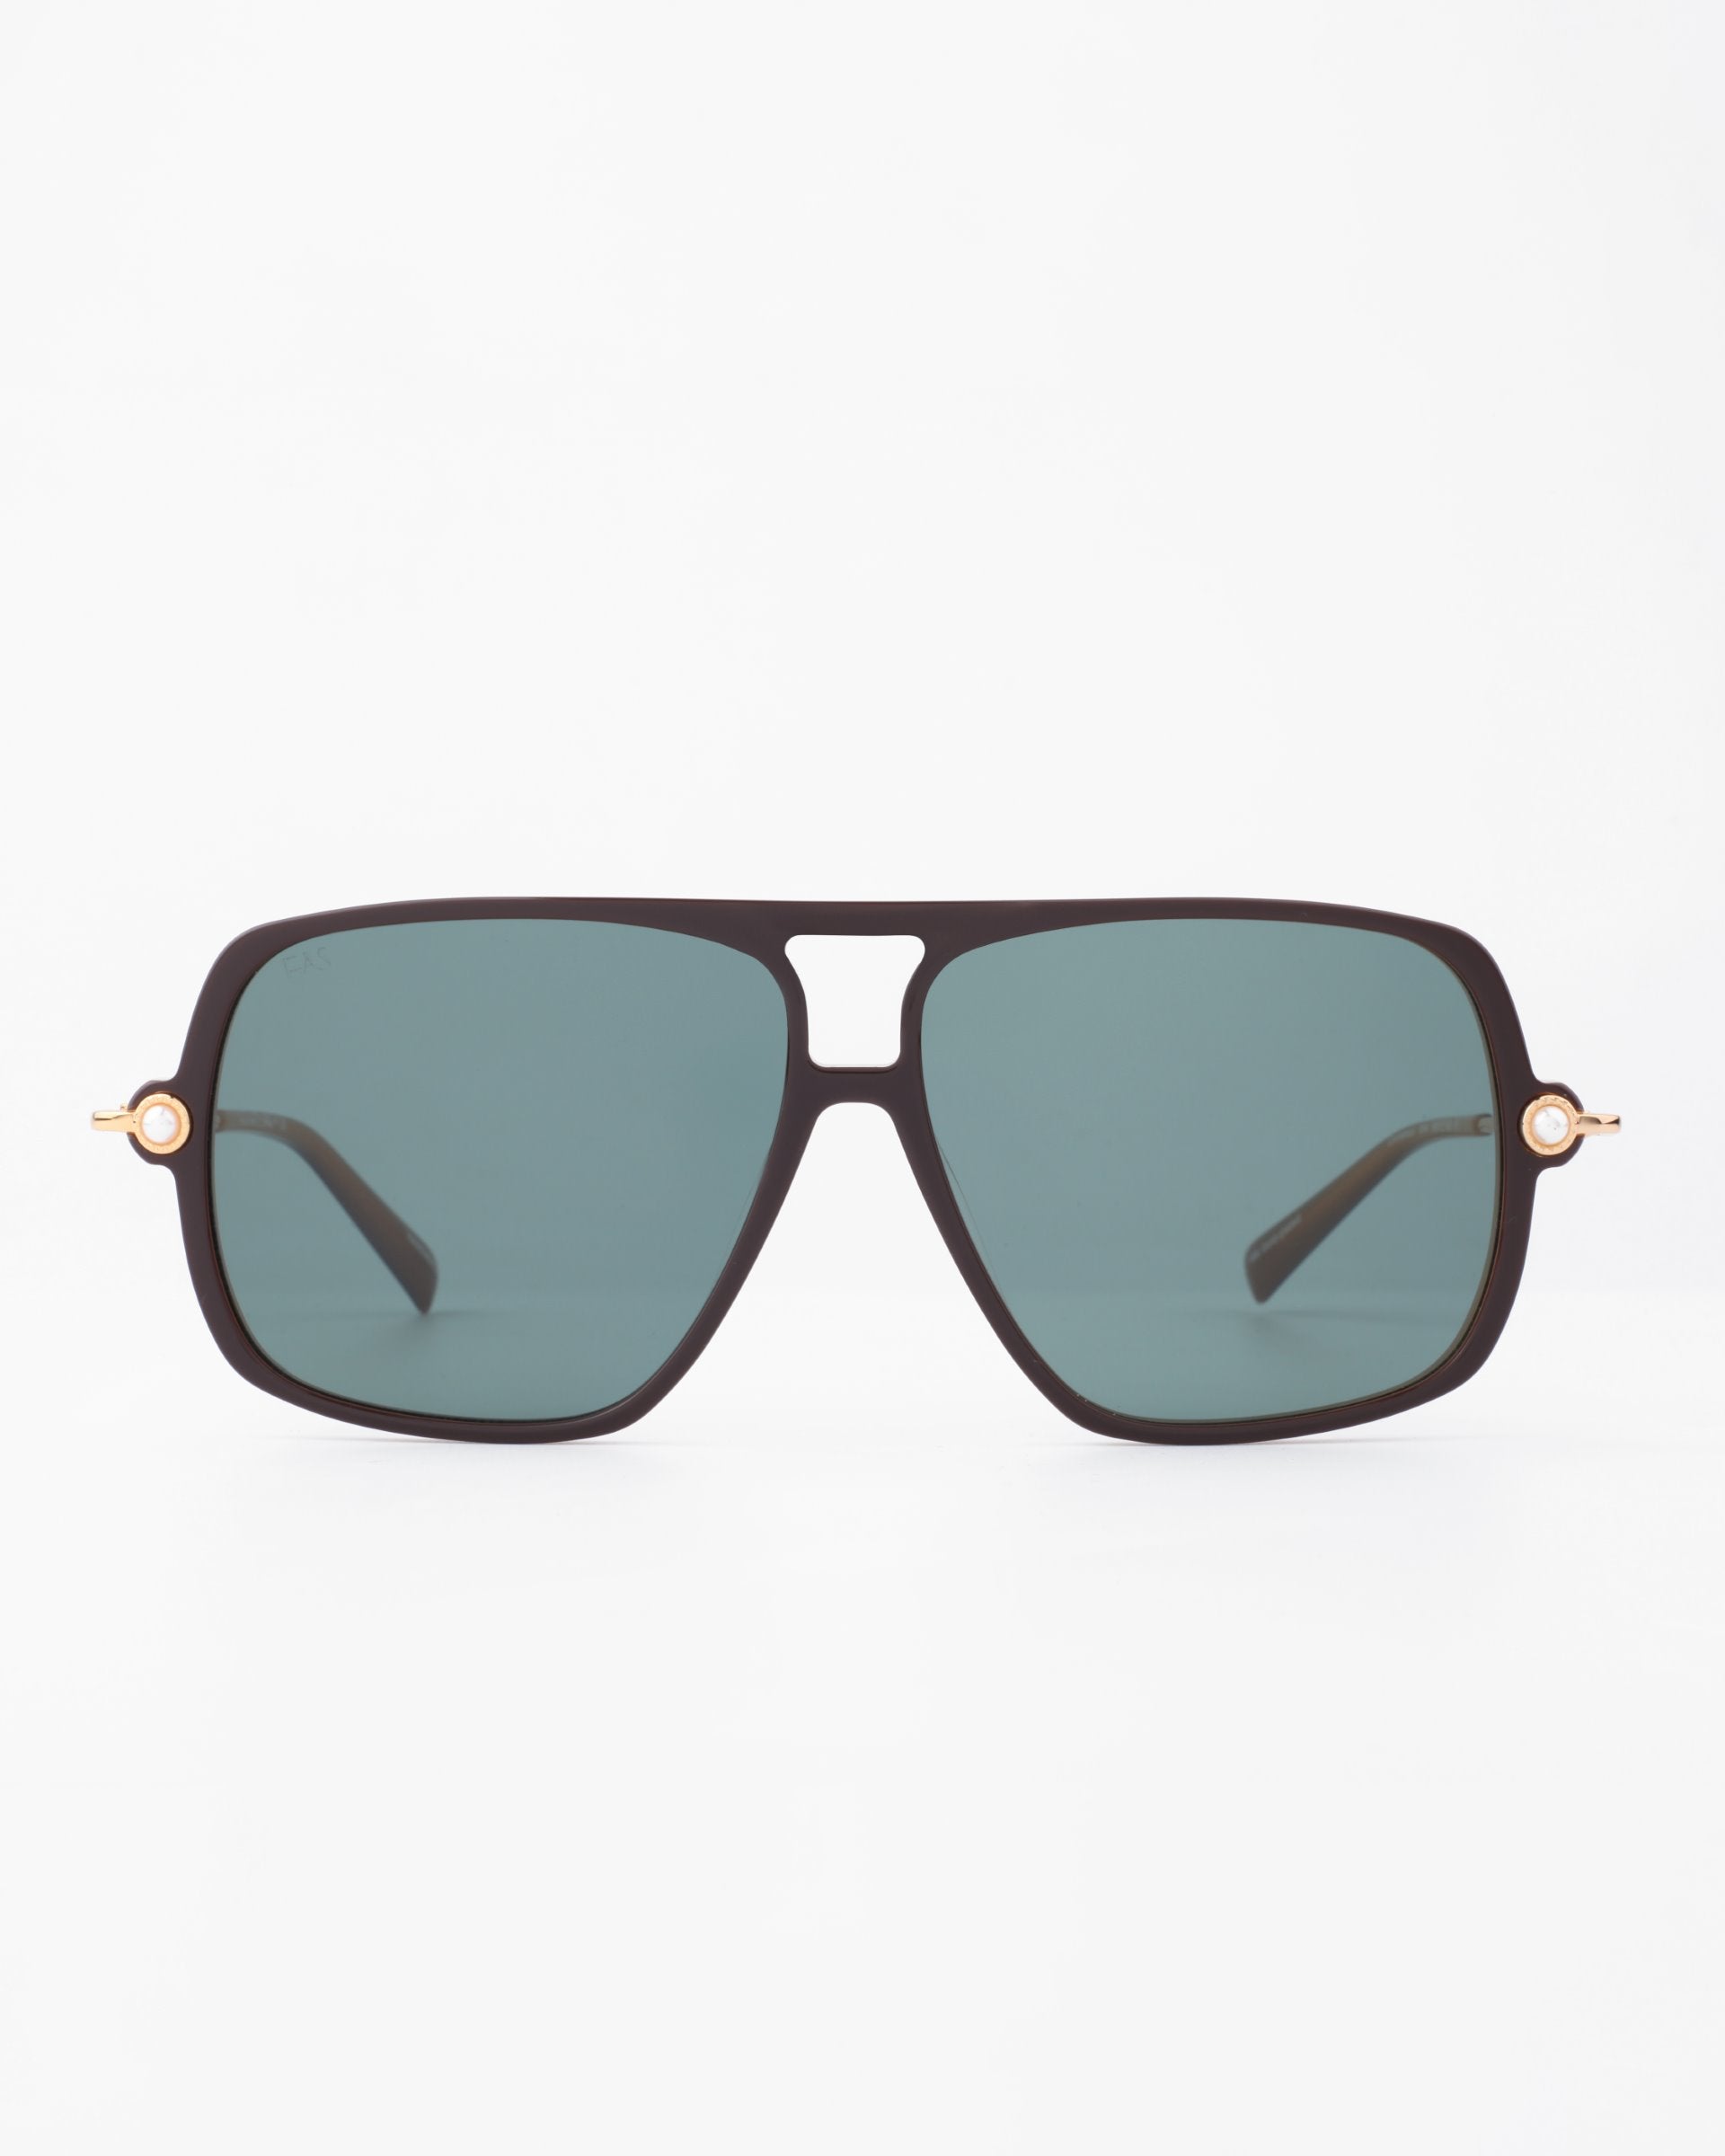 A pair of stylish, large square sunglasses with dark green lenses and a slim black frame. The bridge has a unique double-bar design, and the temples feature small 18-karat gold-plated accents near the hinges. The background is plain white. Introducing Cinnamon by For Art's Sake®.